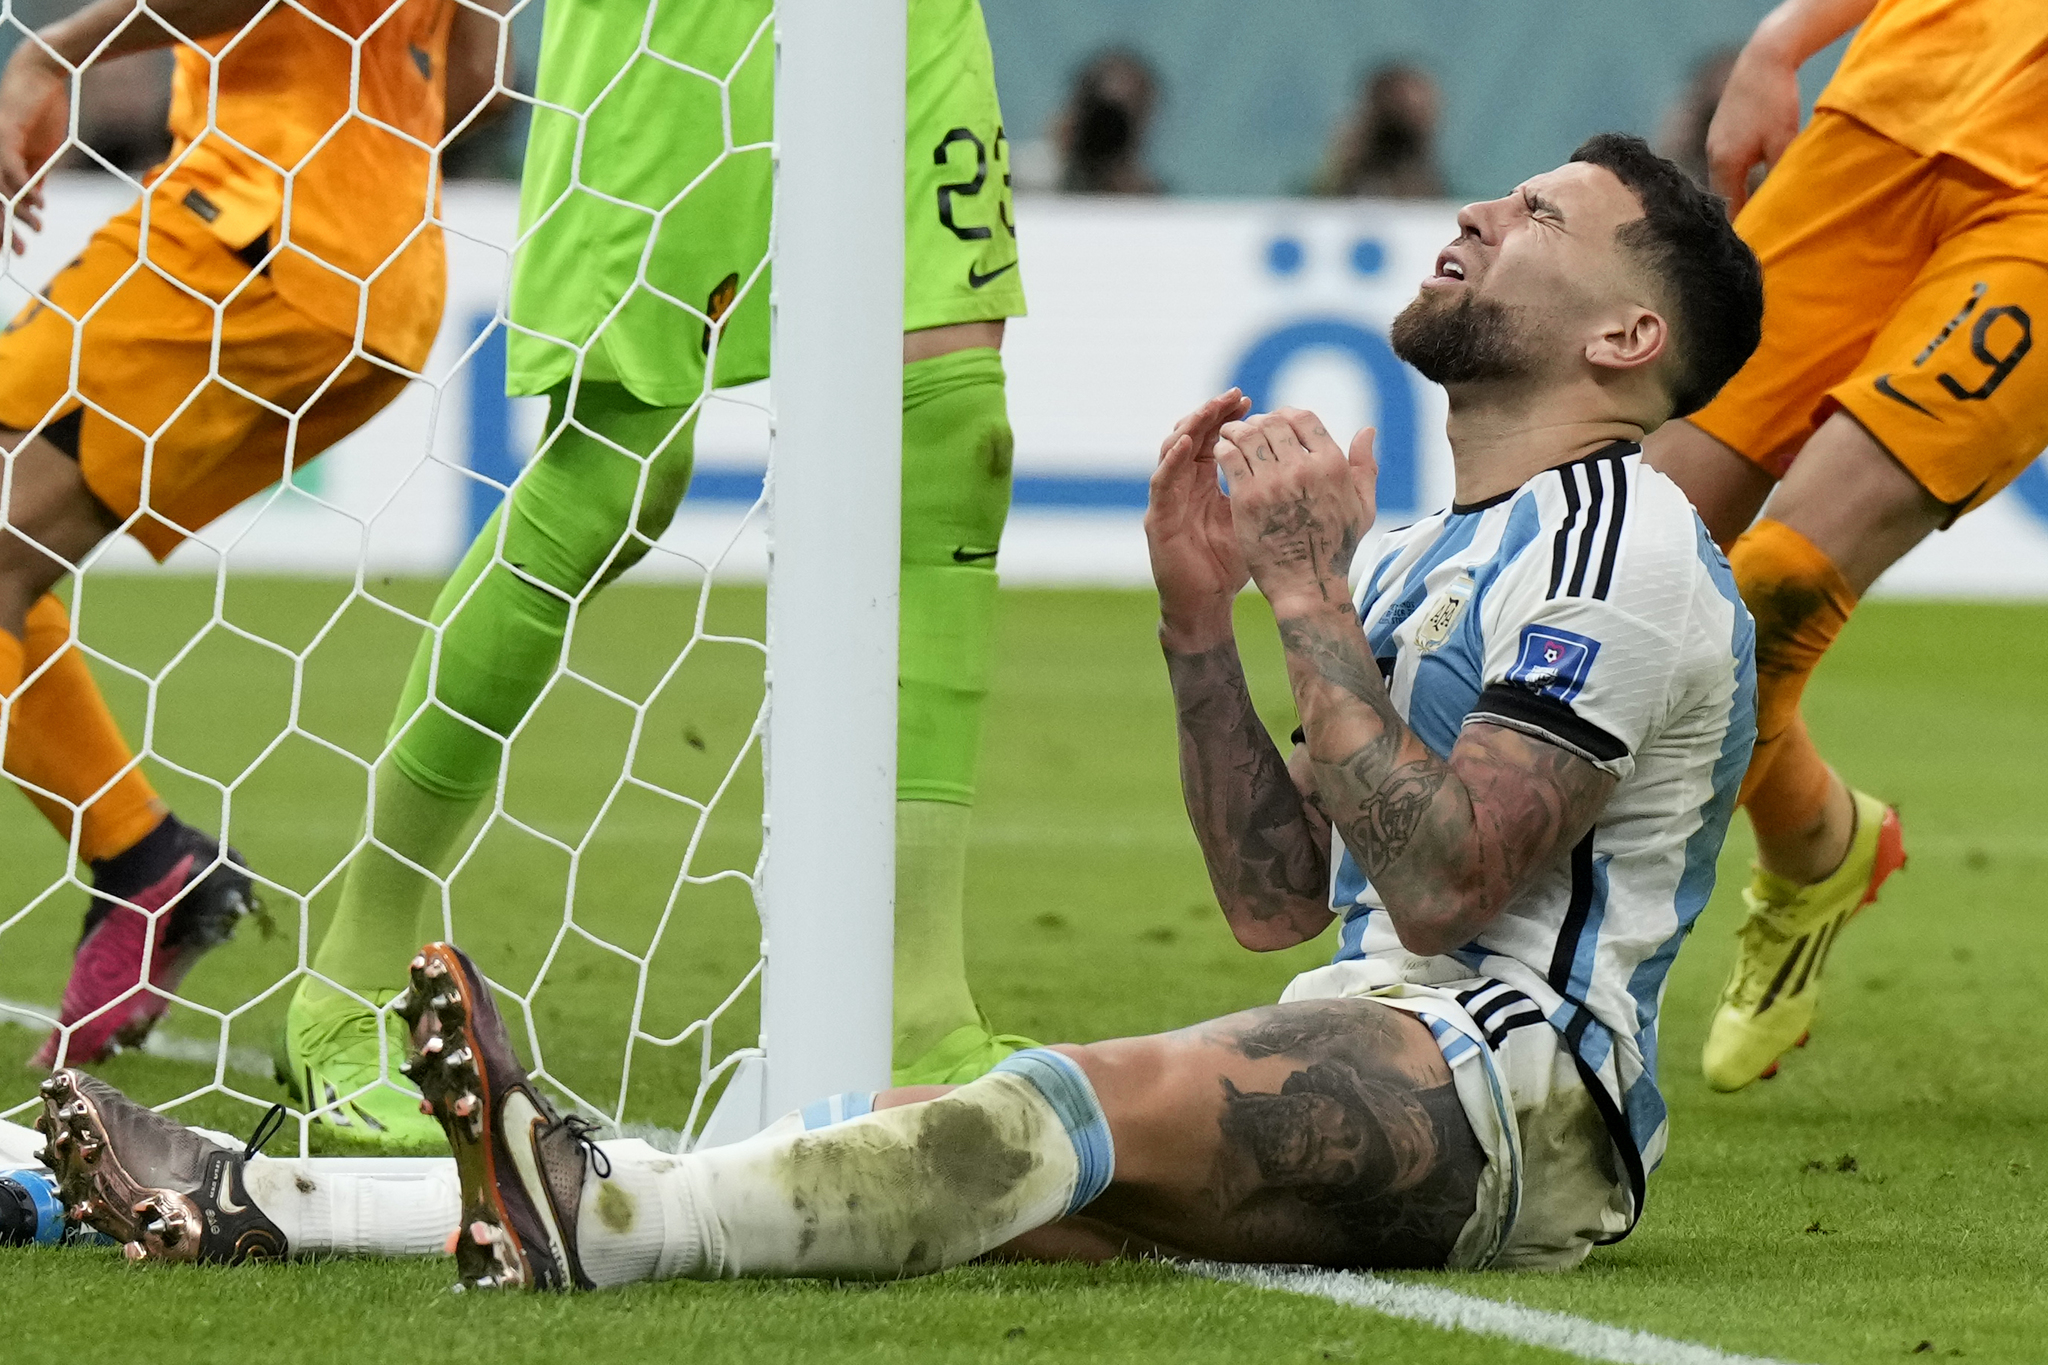  lt;HIT gt;Argentina lt;/HIT gt;'s Nicolas Otamendi reacts after a missed chance to score during the World Cup quarterfinal soccer match between the Netherlands and  lt;HIT gt;Argentina lt;/HIT gt;, at the Lusail Stadium in Lusail, Qatar, Saturday, Dec. 10, 2022. (AP Photo/Ricardo Mazalan)